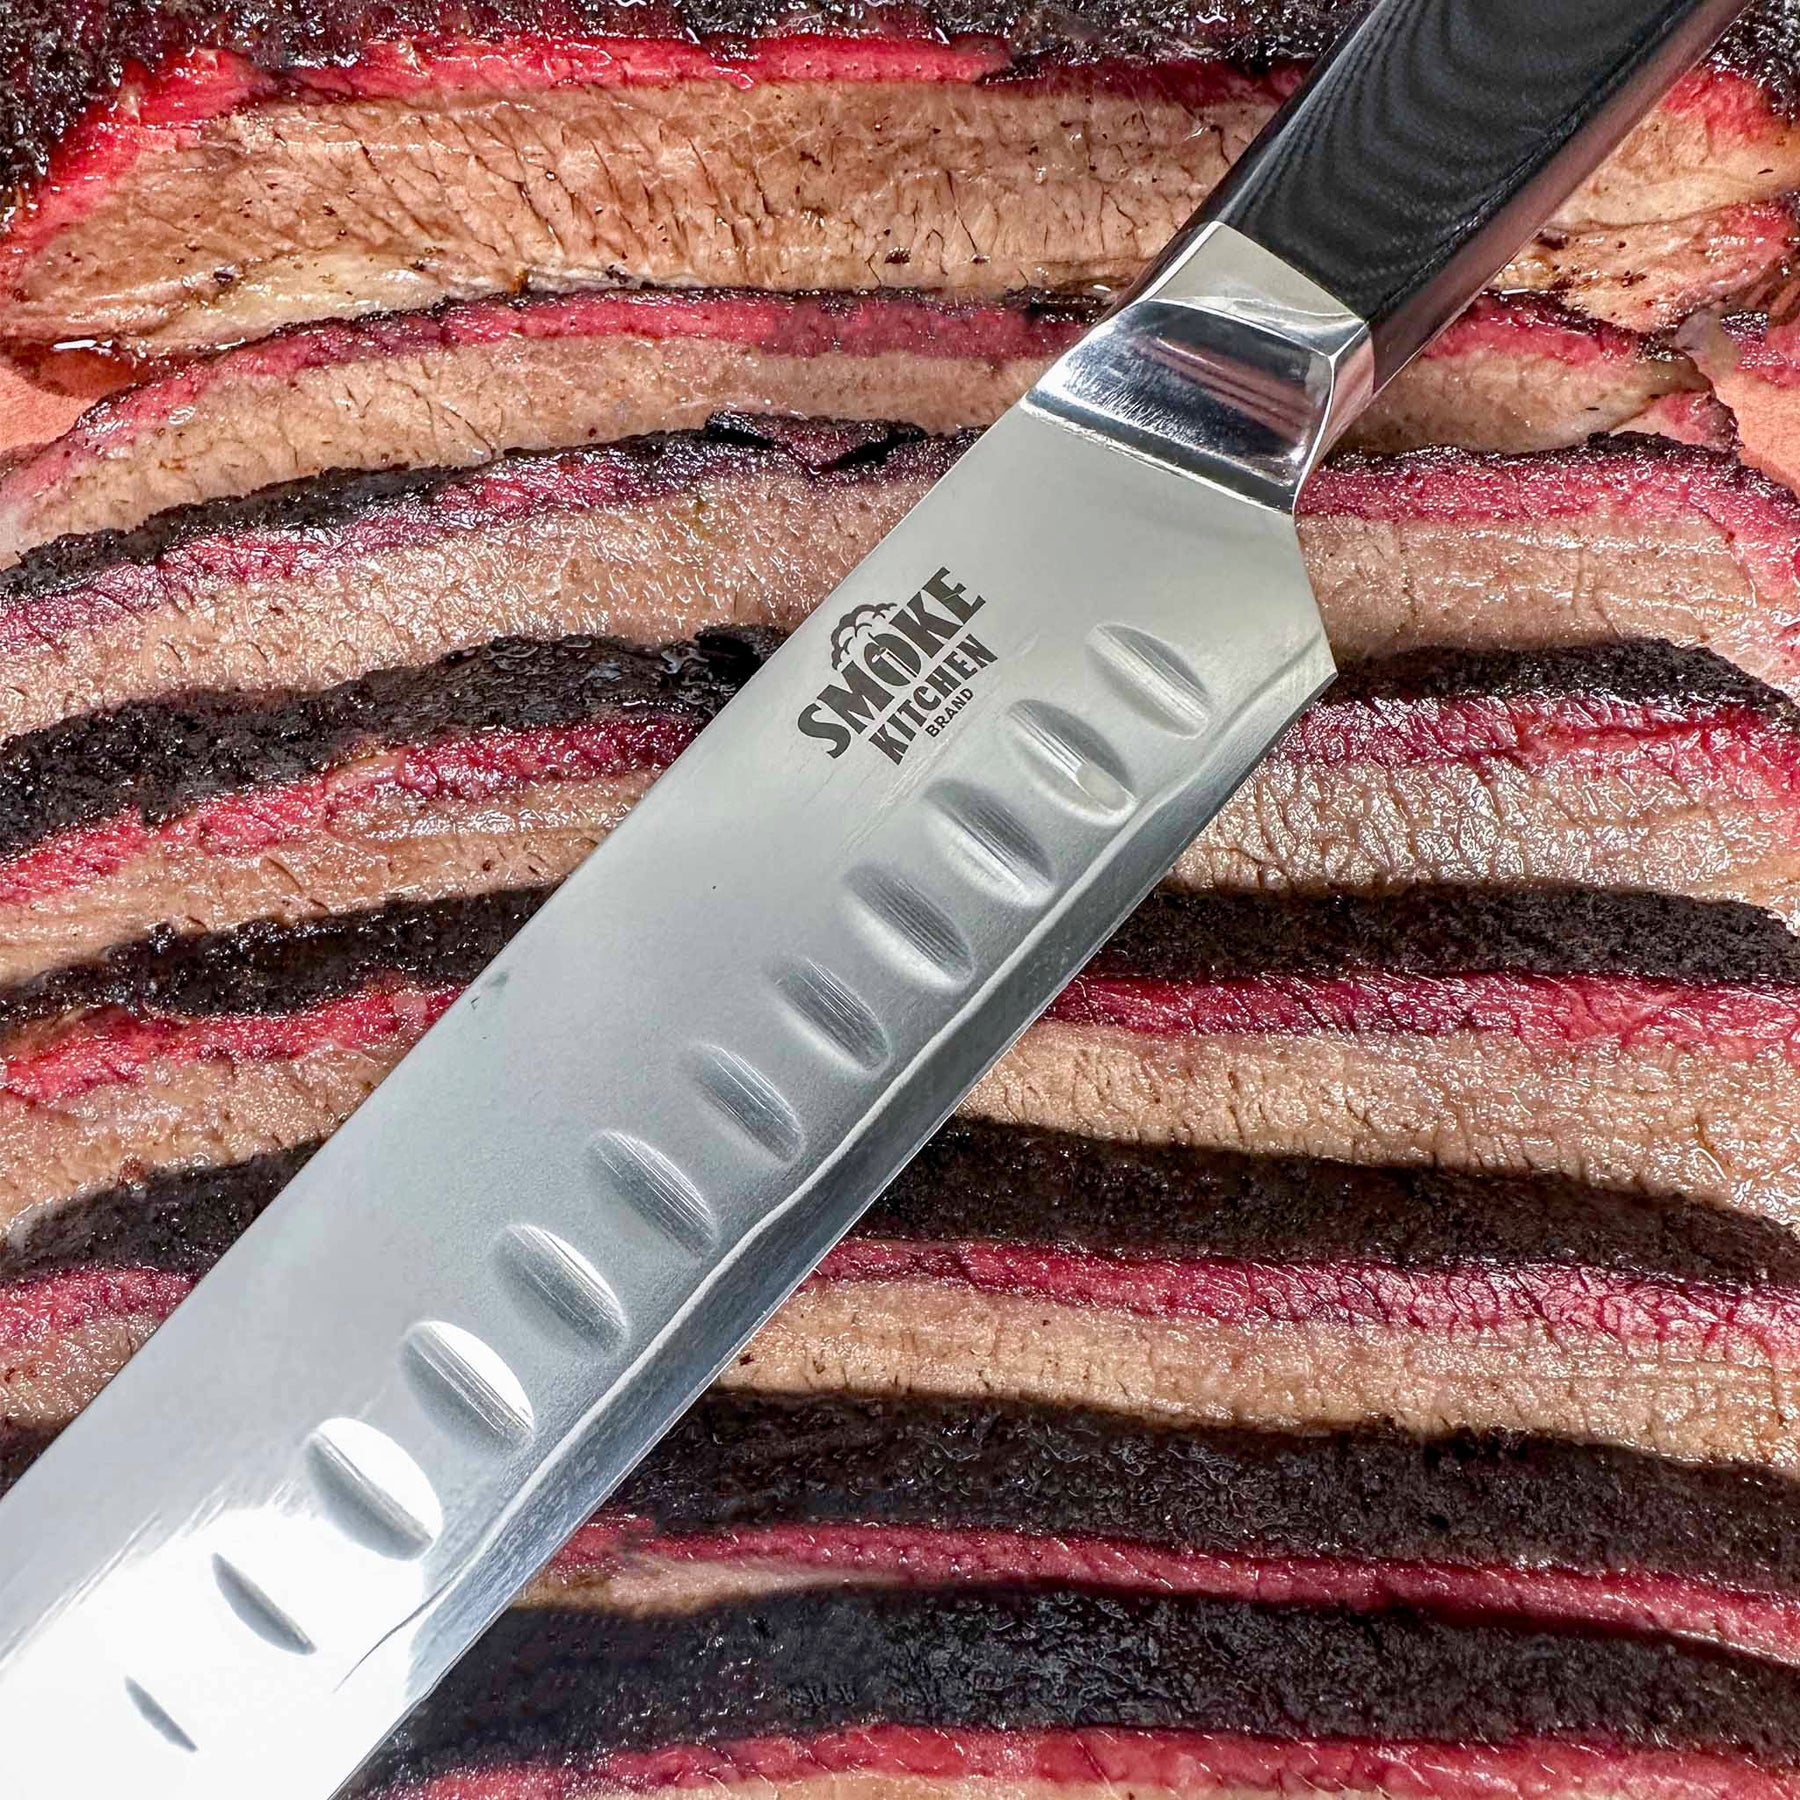 DRAGON RIOT Premium Slicing Brisket Knife 12 inch Slicer Knife for Meat  Cutting - Stainless and Sharp BBQ Grill Roast Turkey Carving Knife Gift for